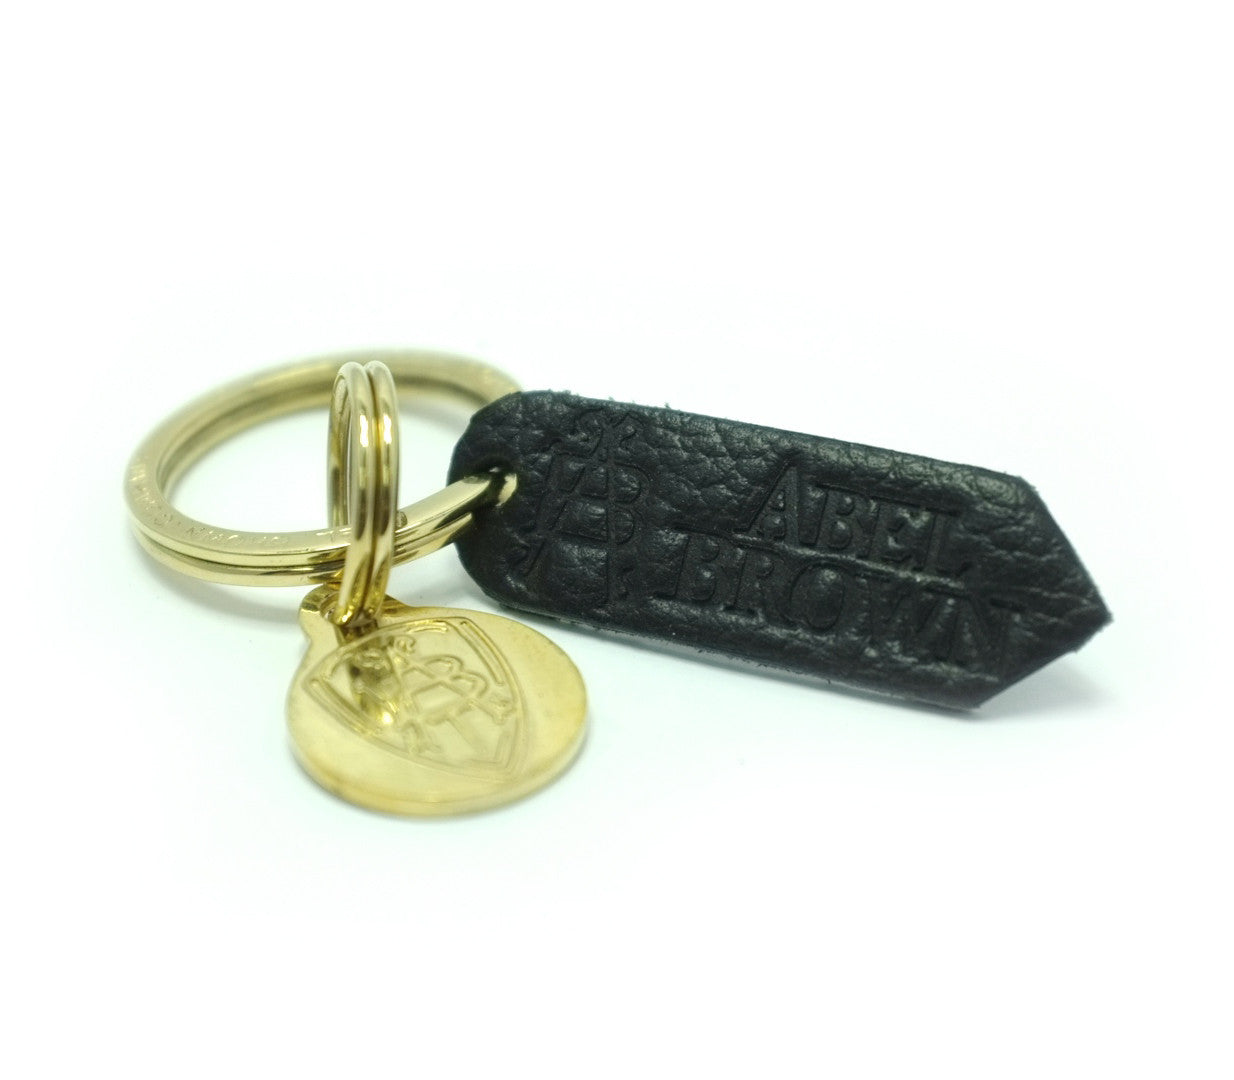 Keeper Key Ring - Leather Motorcycle Gloves And Gear